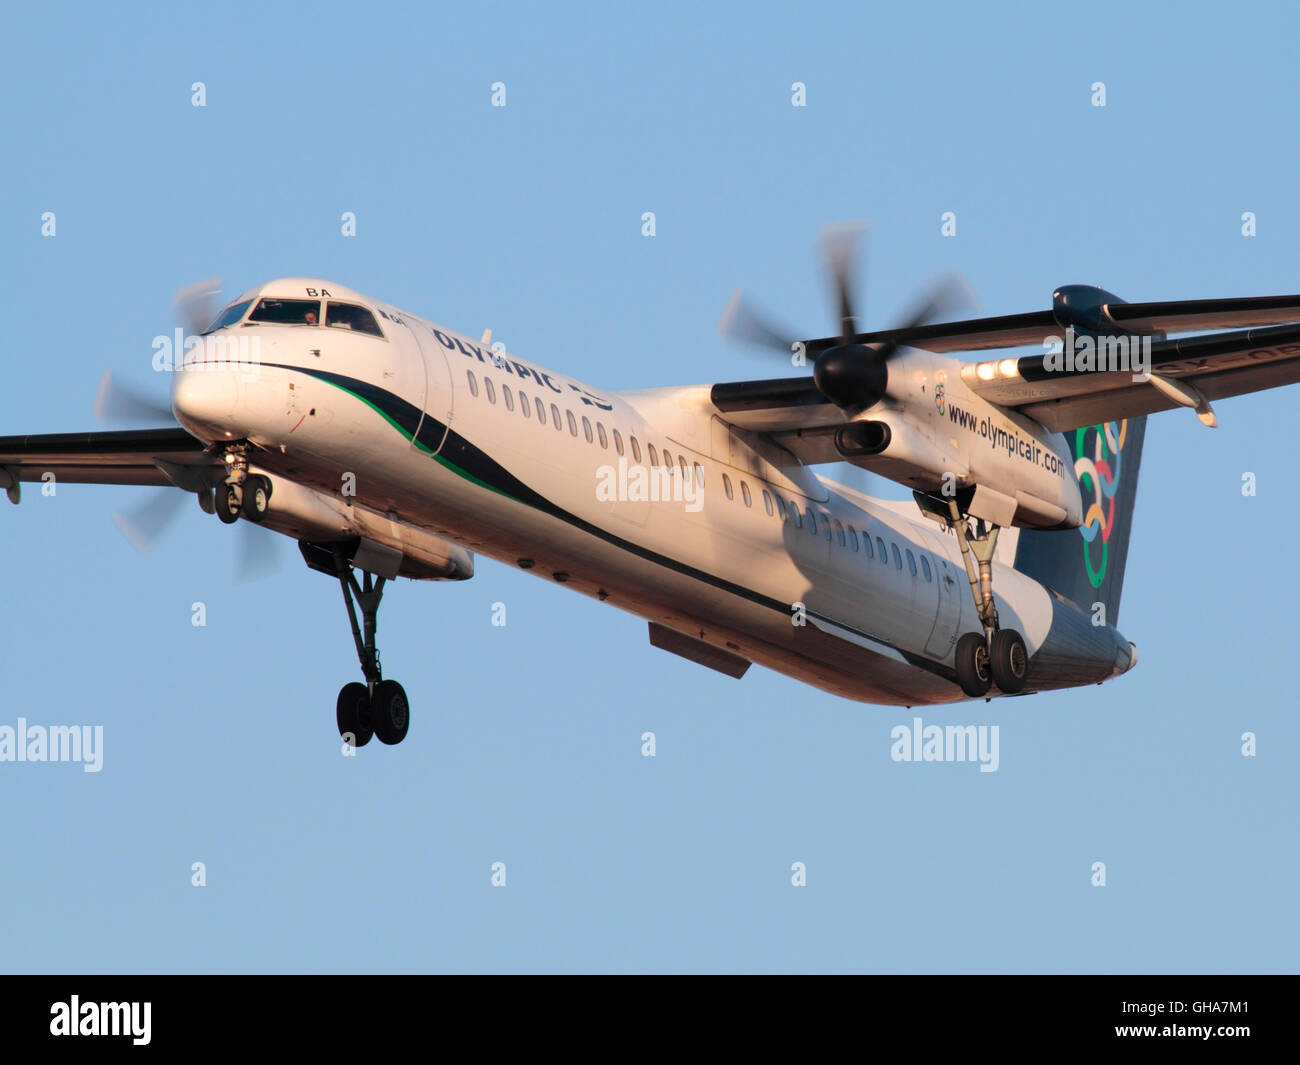 Propeller plane. Dash 8 airplane belonging to Olympic Air, a subsidiary of Aegean Airlines, on approach. Prop powered airliner front view close up. Stock Photo